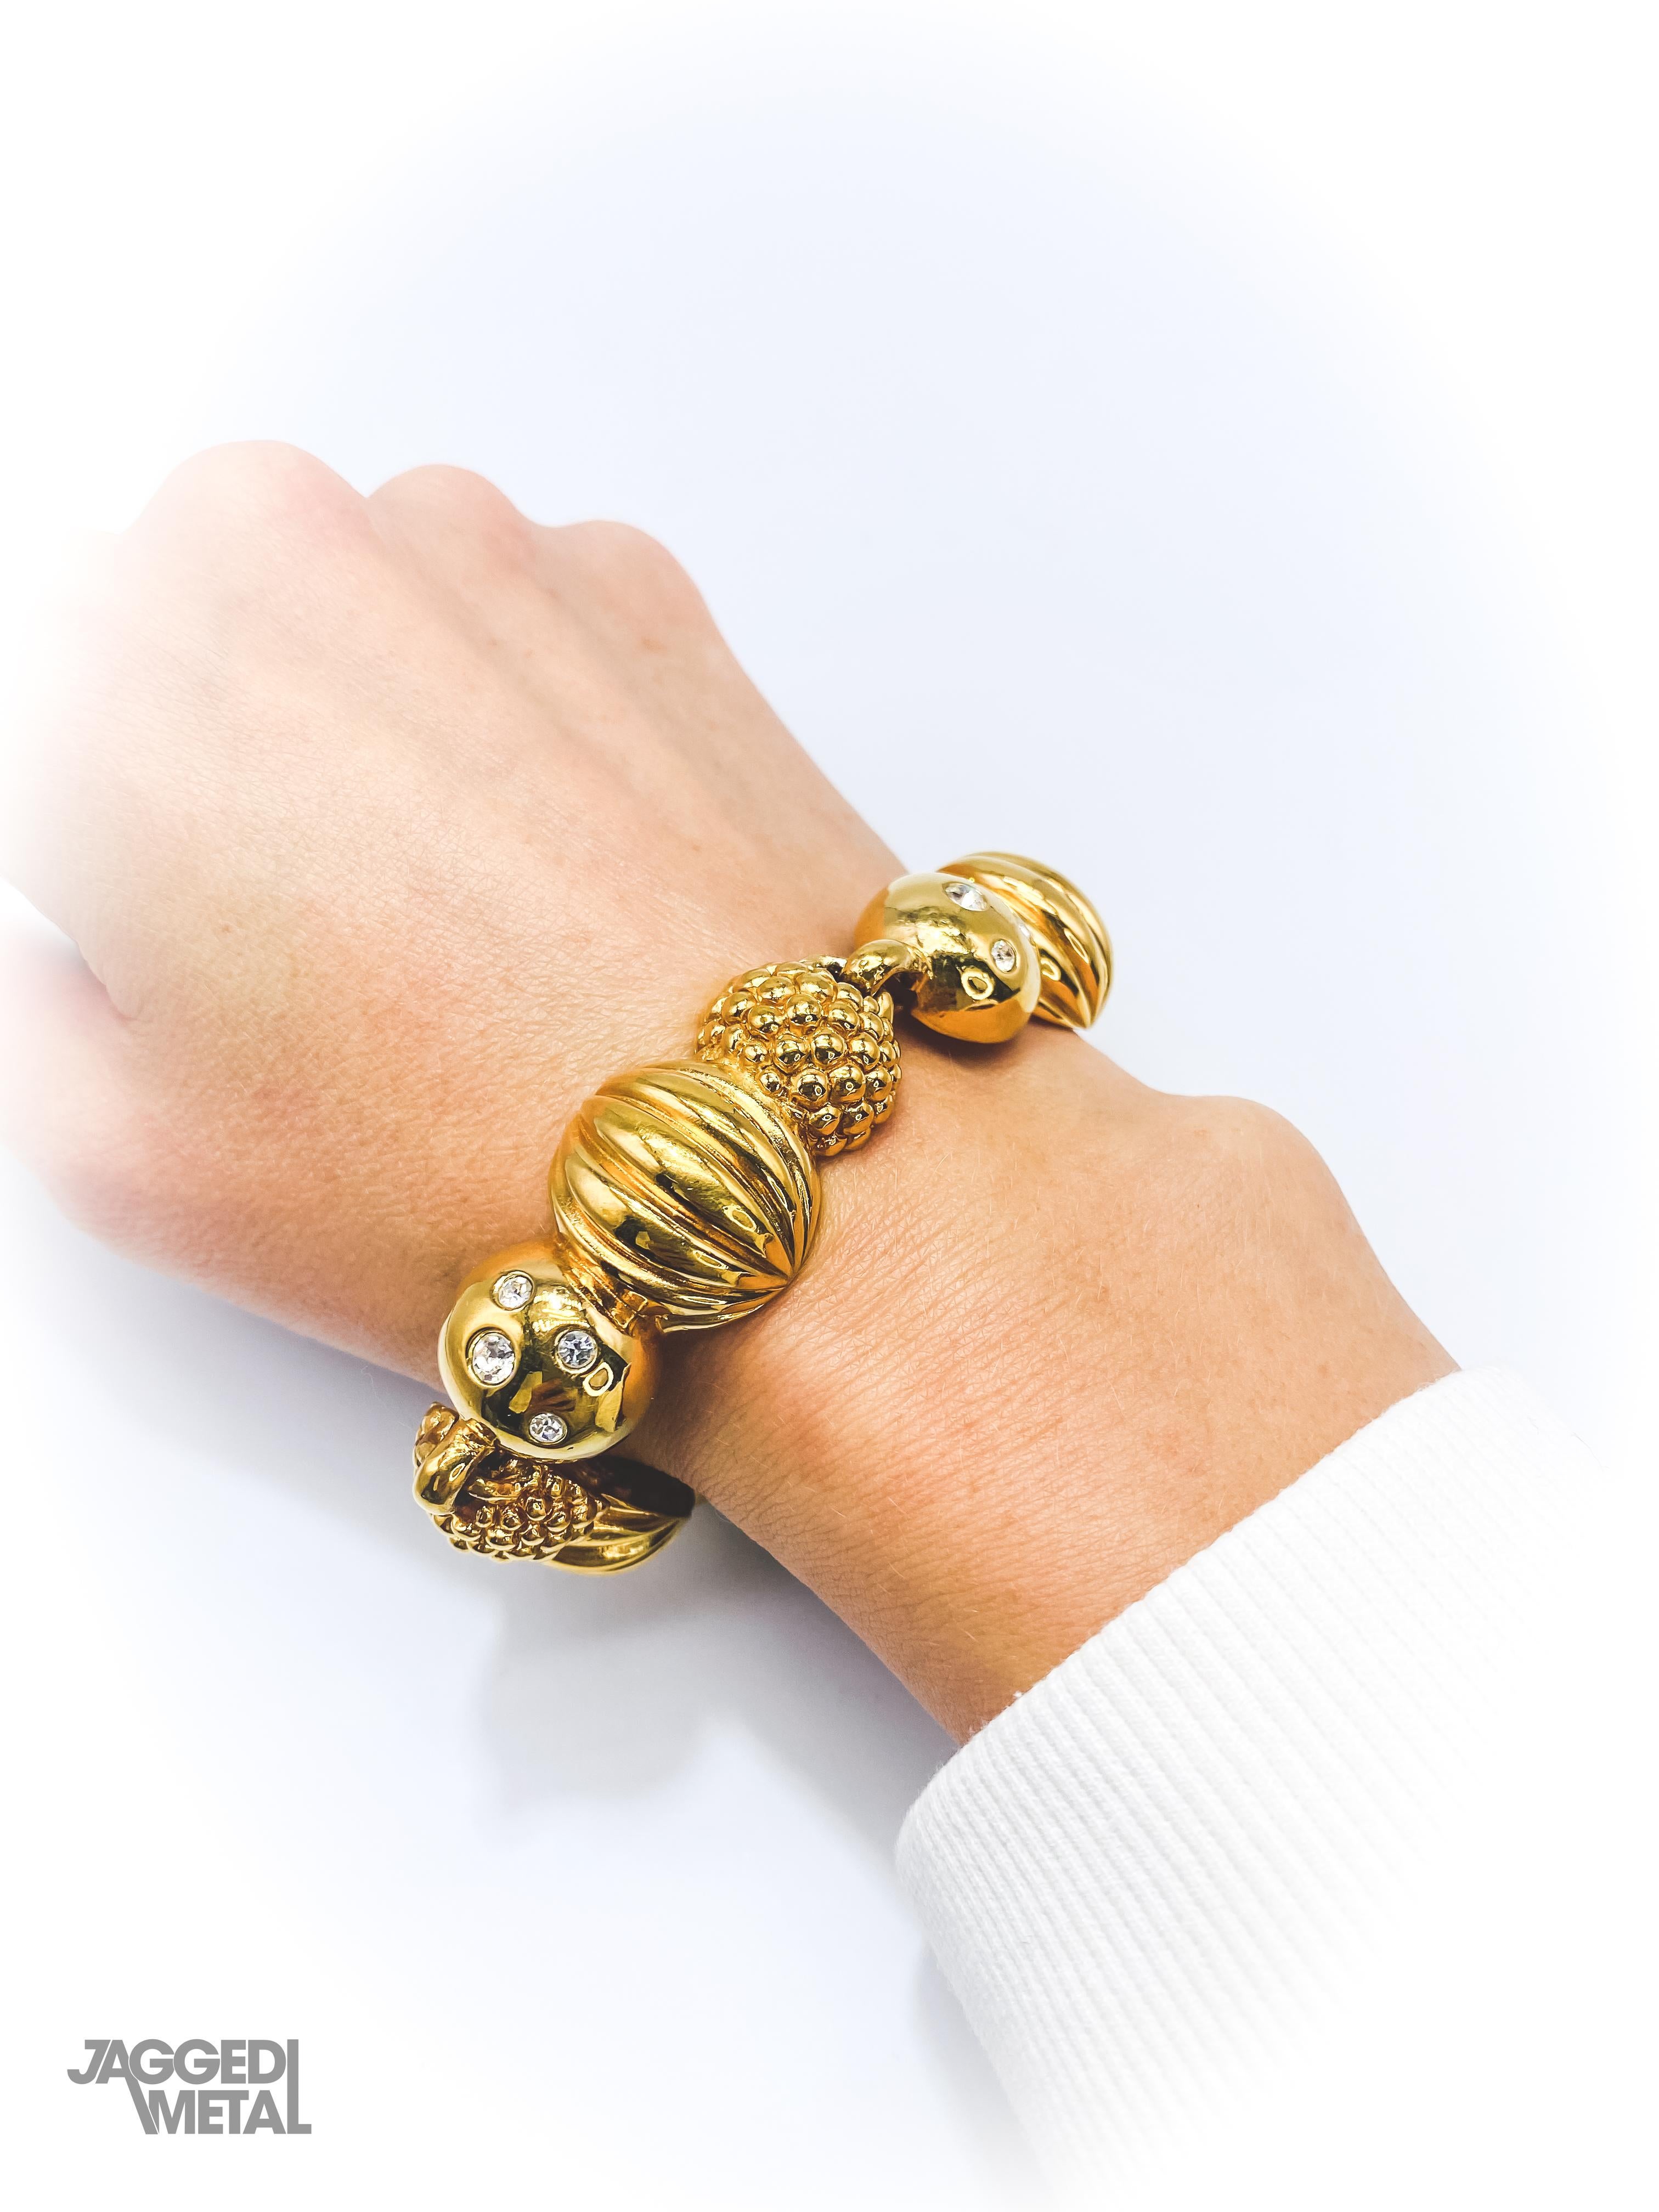 Lanvin 1980s Vintage Bracelet

An amazing statement bracelet from the House of Lanvin, with classic 80s glam styling. Made in France in the mid to late 80s, cast from textured gold plated metal and set with tiny crystals. Team with your favourite